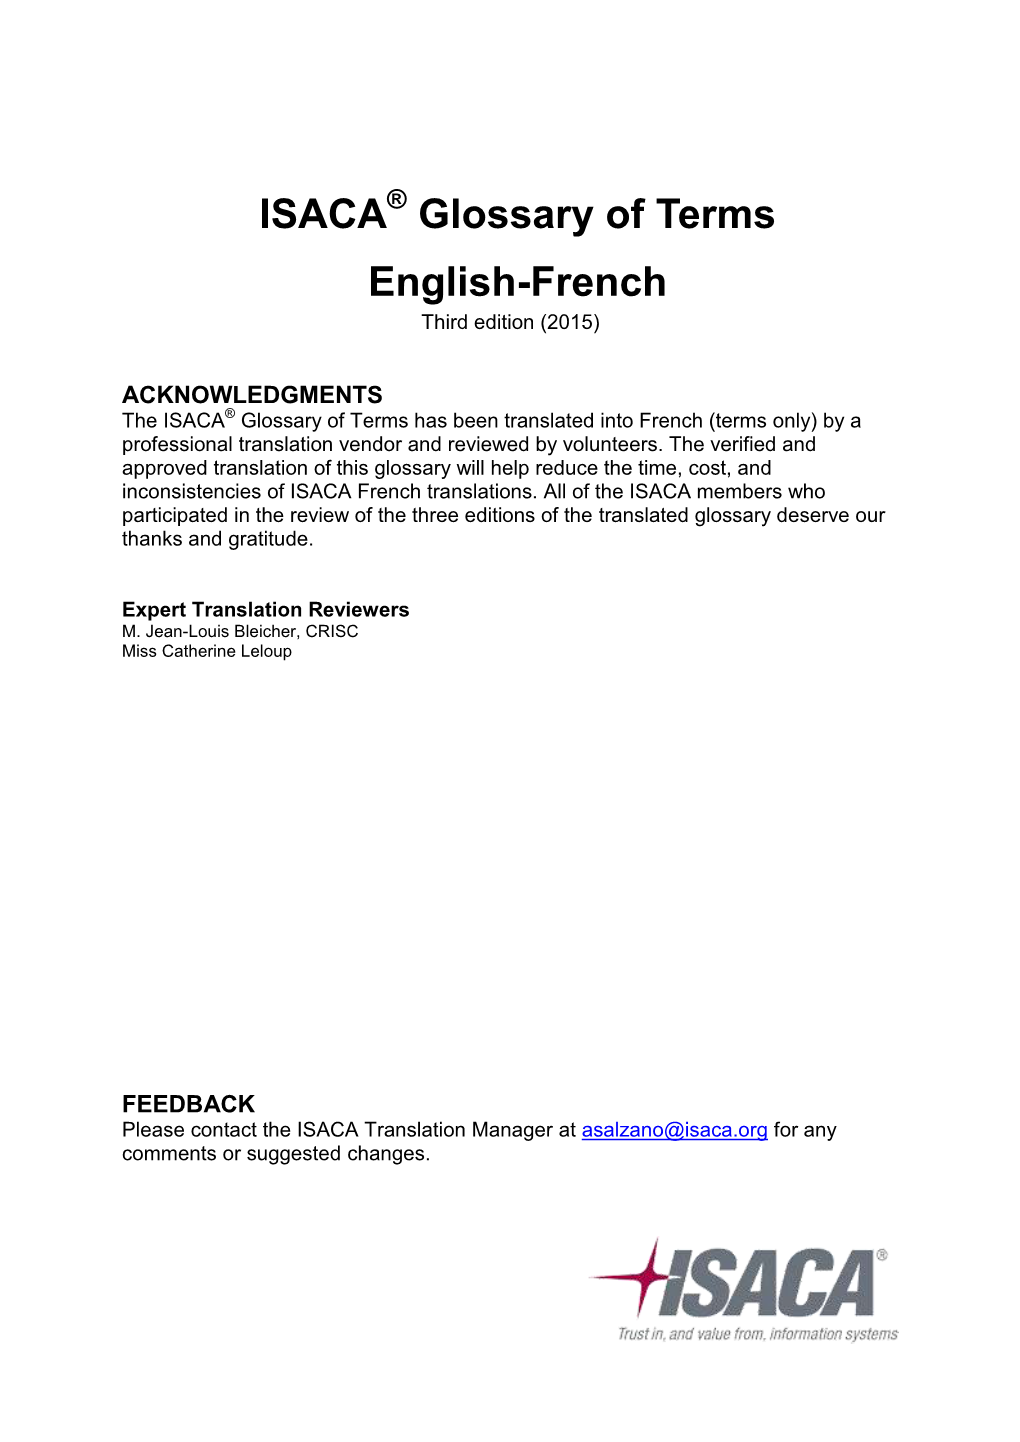 ISACA Glossary of Terms English-French